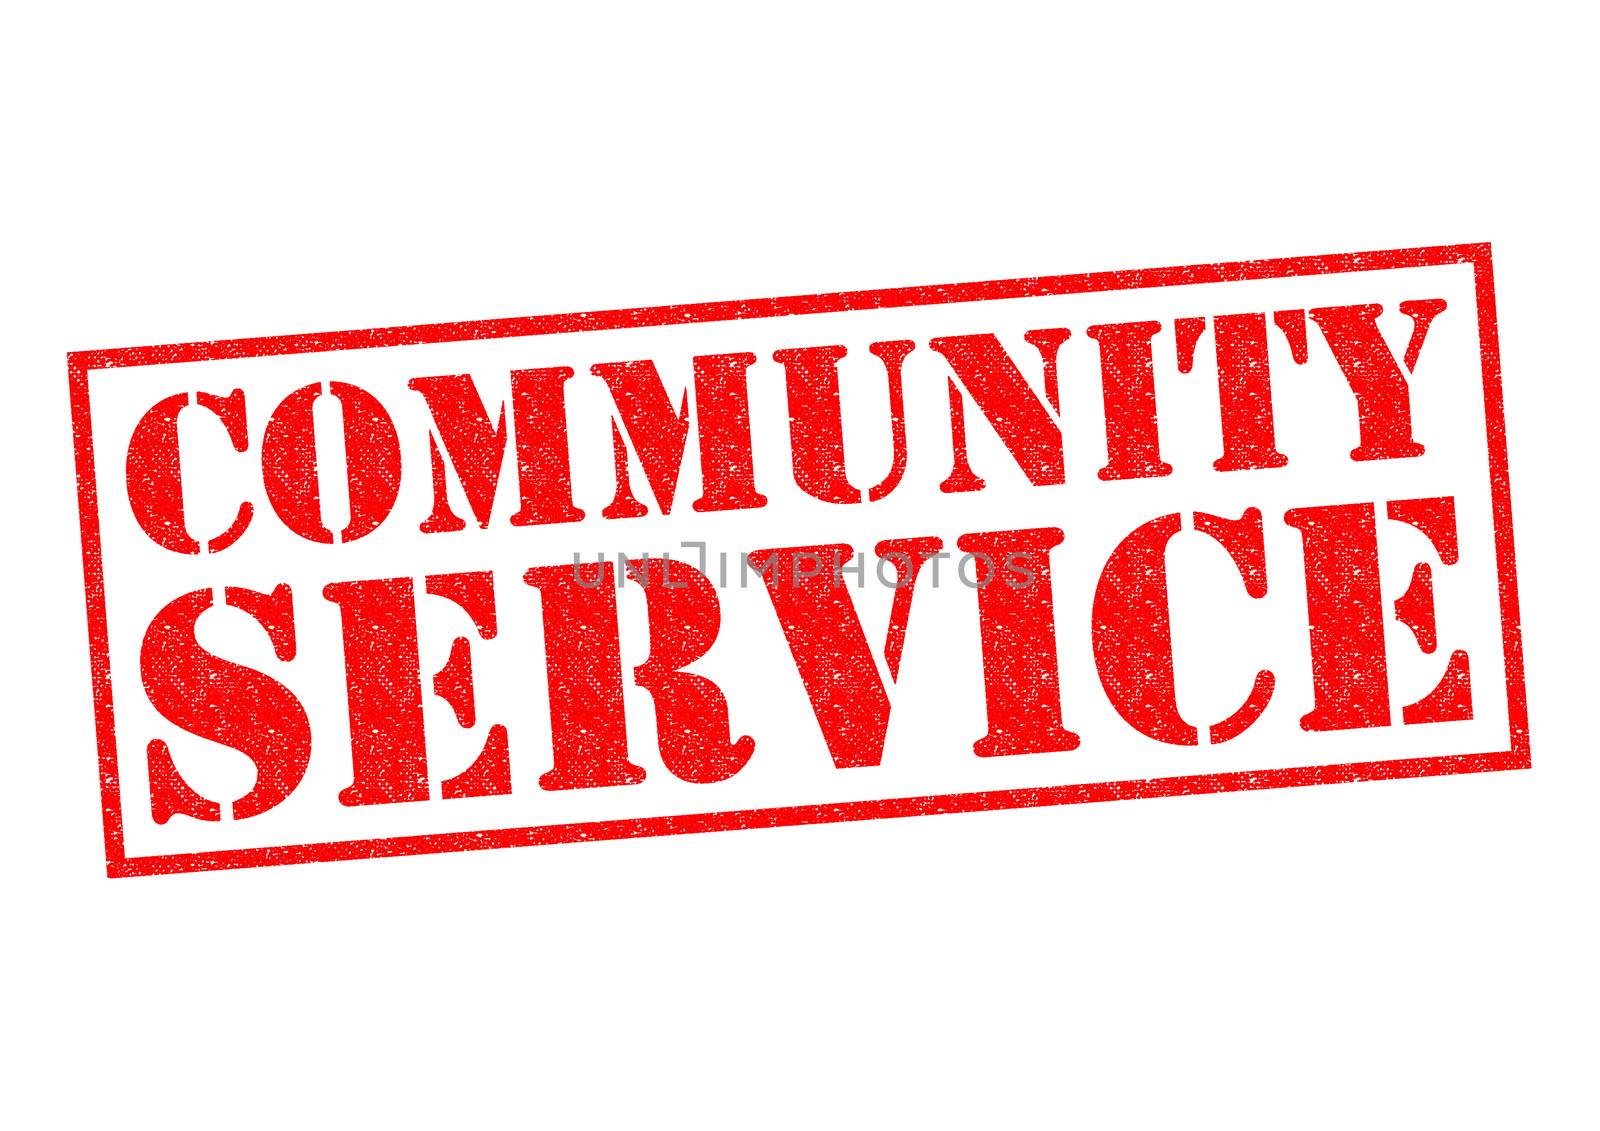 COMMUNITY SERVICE red Rubber Stamp over a white background.